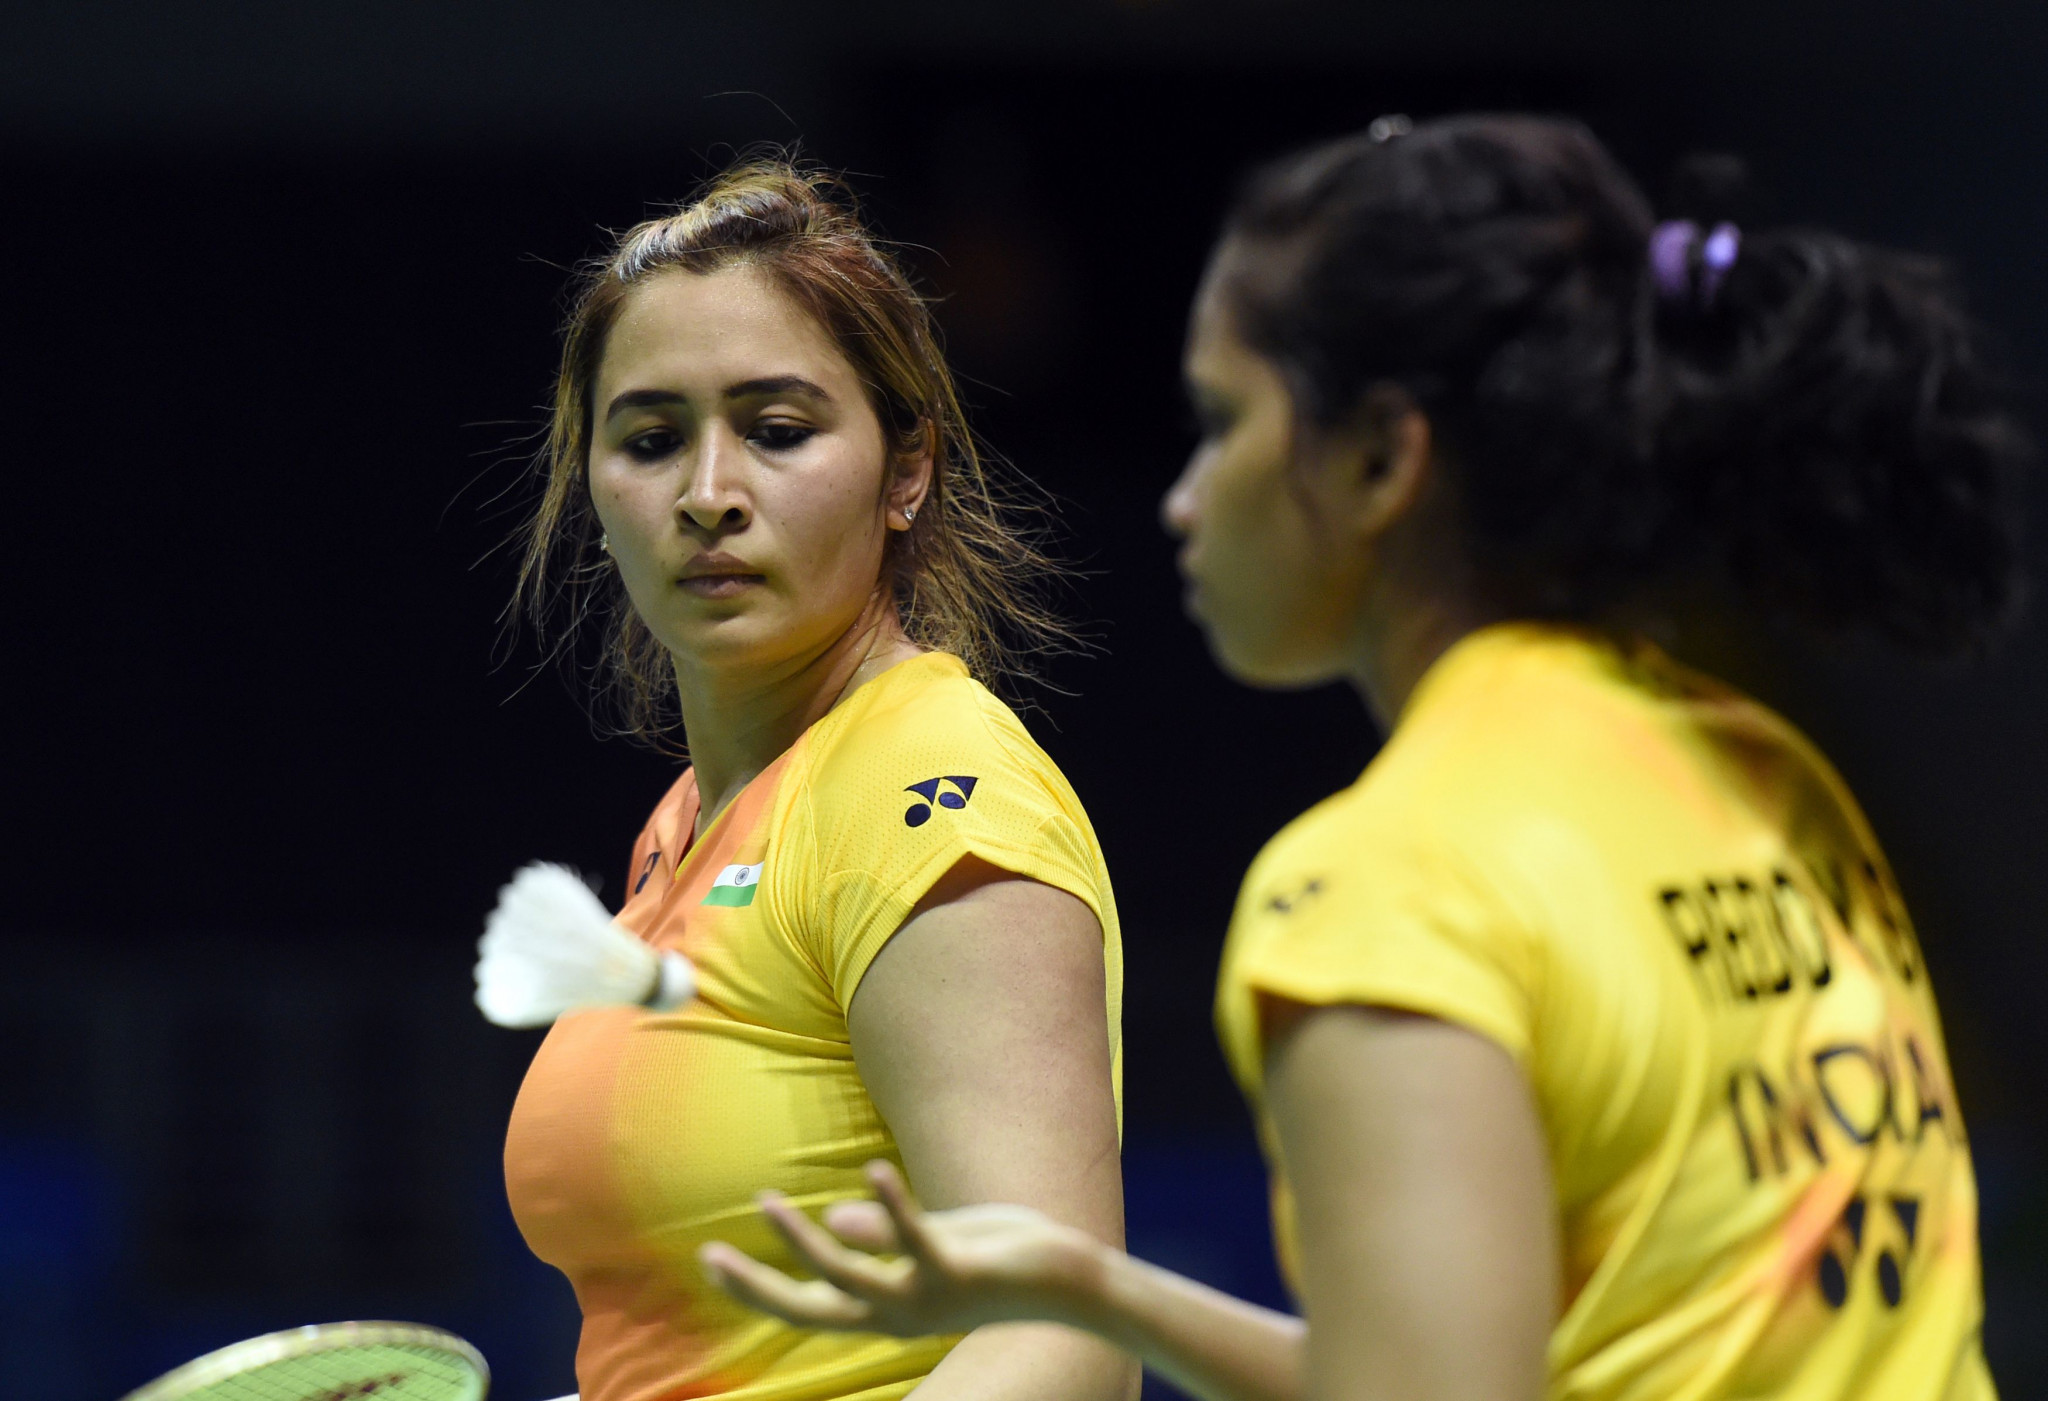 India came third in the Uber Cup in 2014 and 2016 ©Getty Images